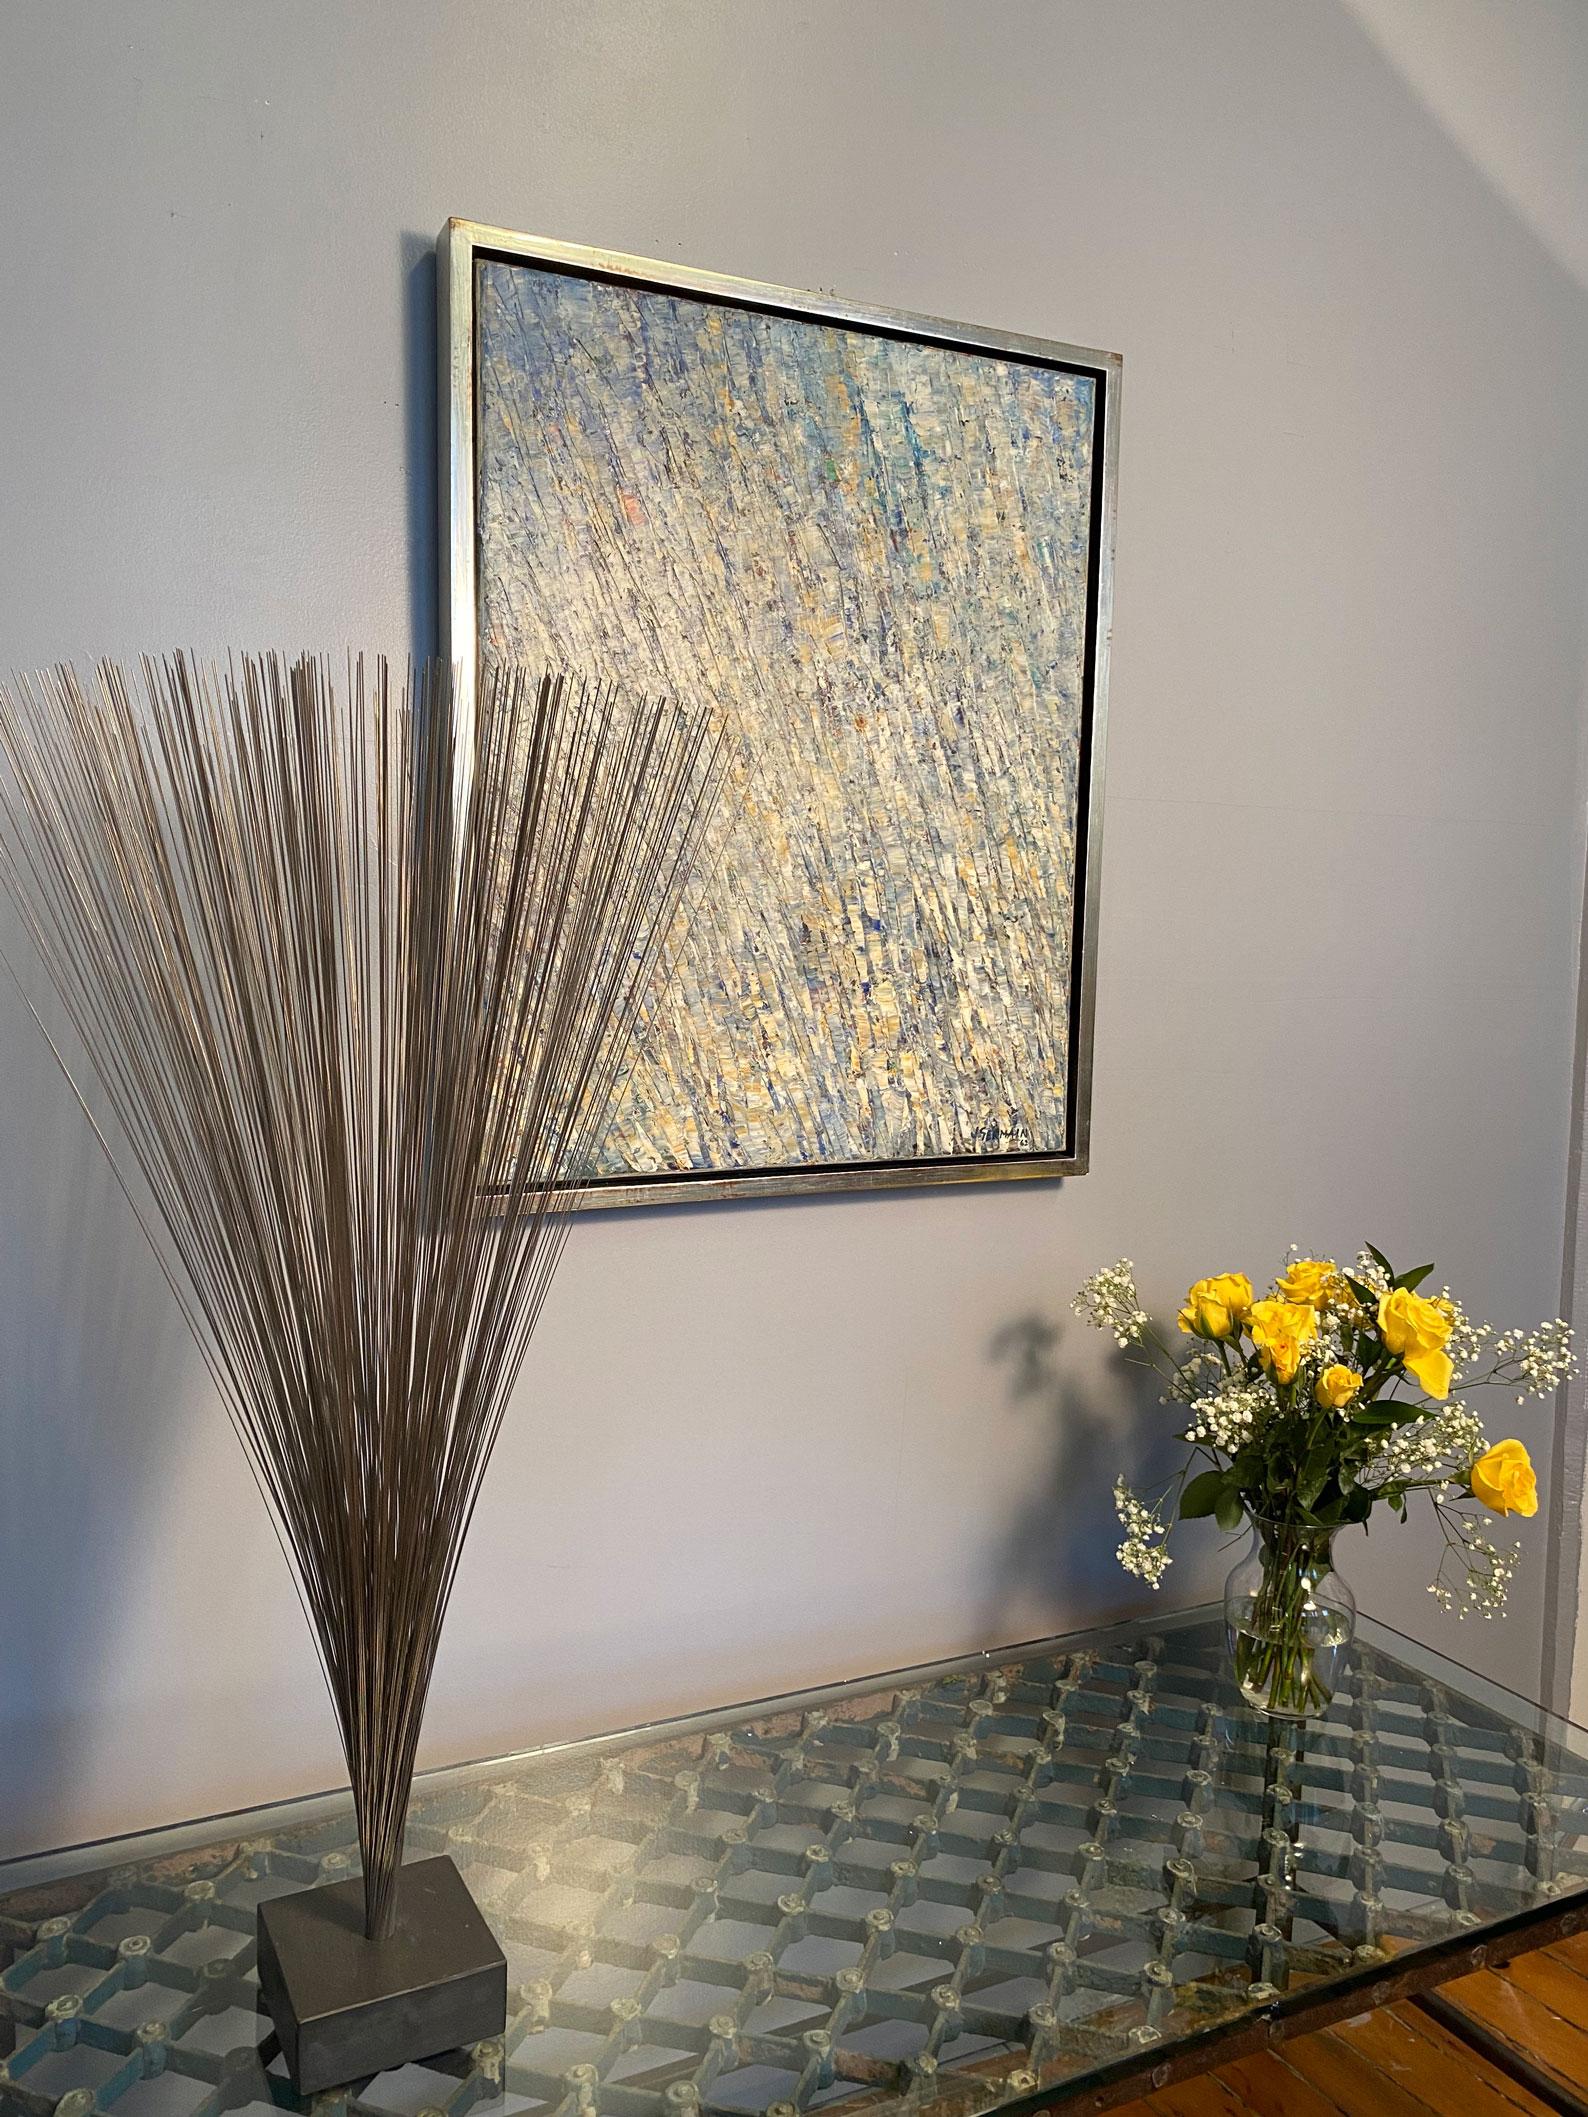 Bertoia’s spray sculptures are his most elegant sculpture creations.  While they do not make any sound, they are meant to be “played” with and are carefully orchestrated to move in a hypnotic and graceful manner.  Whether gathered in one’s hand and